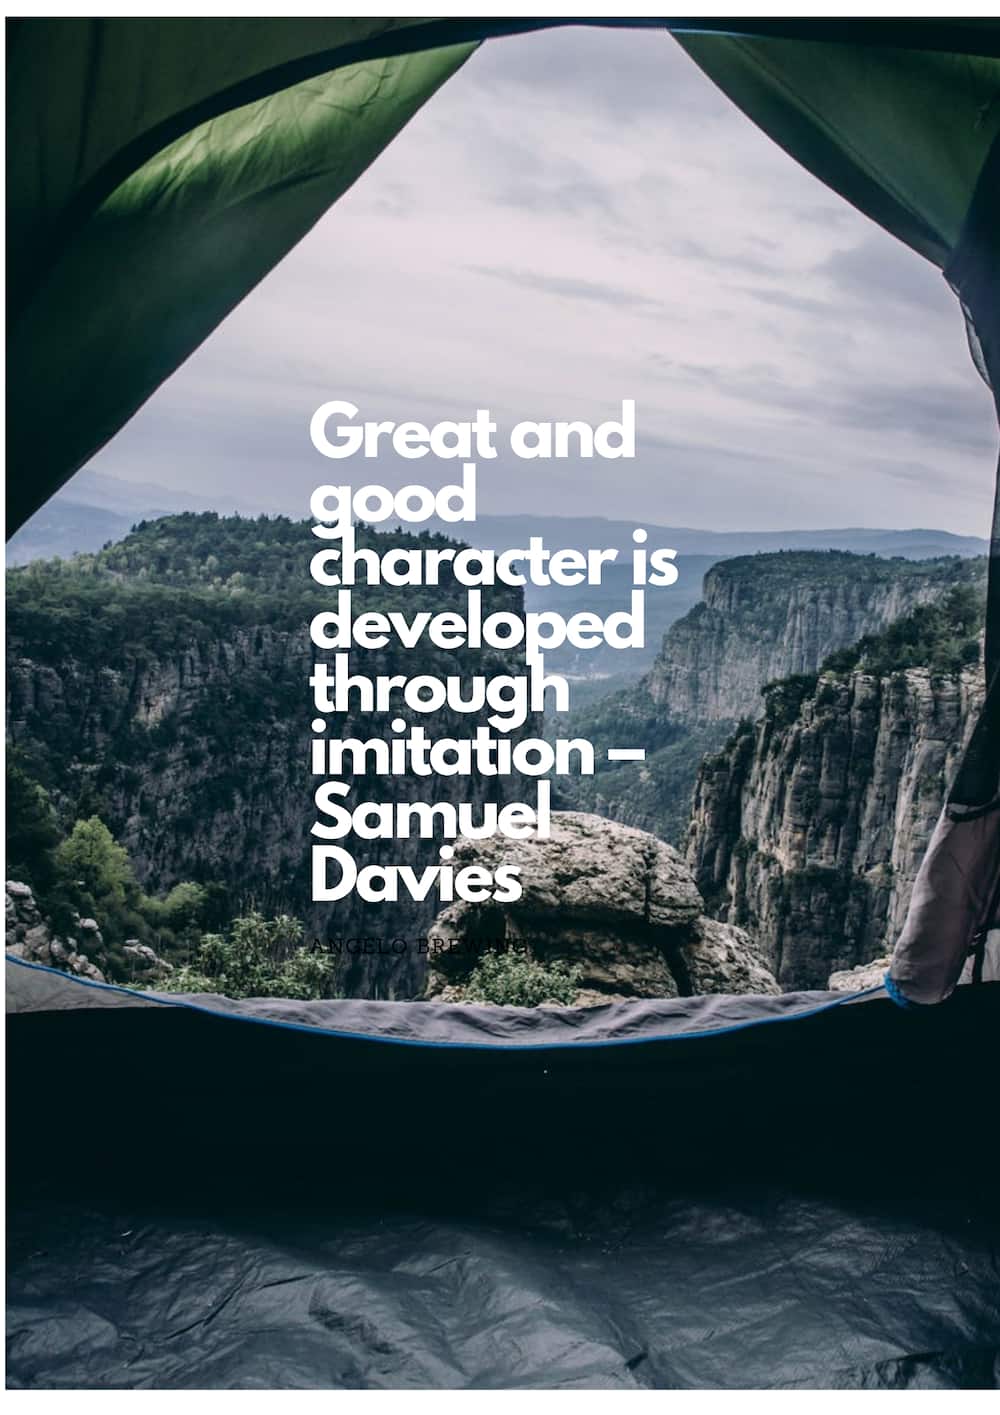 Quotes on character and reputation